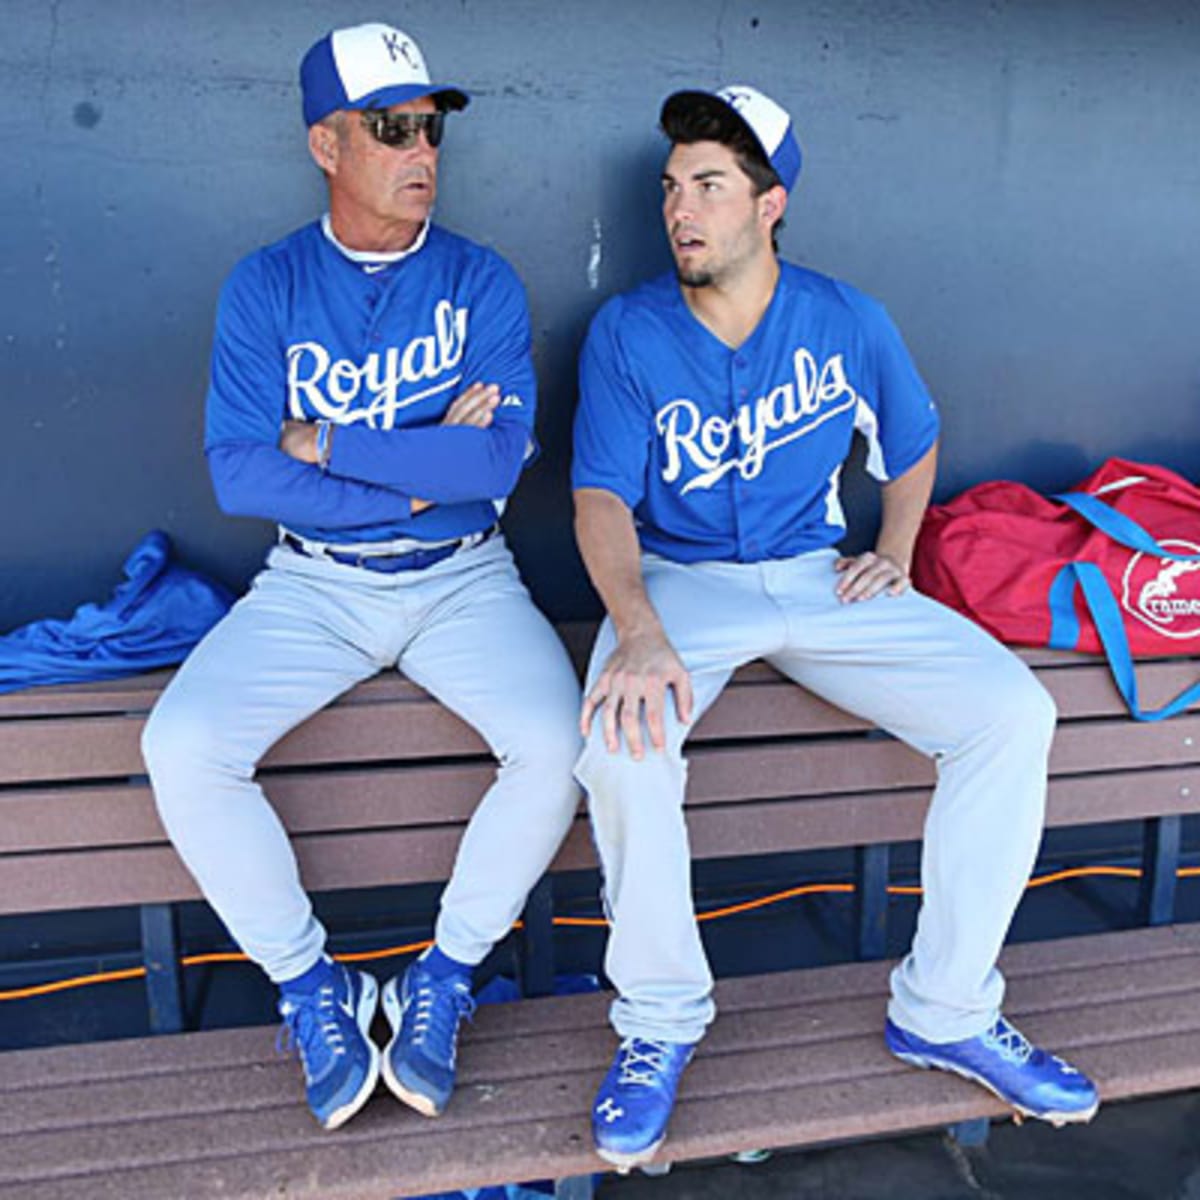 Here's what we had to say about Eric Hosmer and Mike Moustakas in 2011